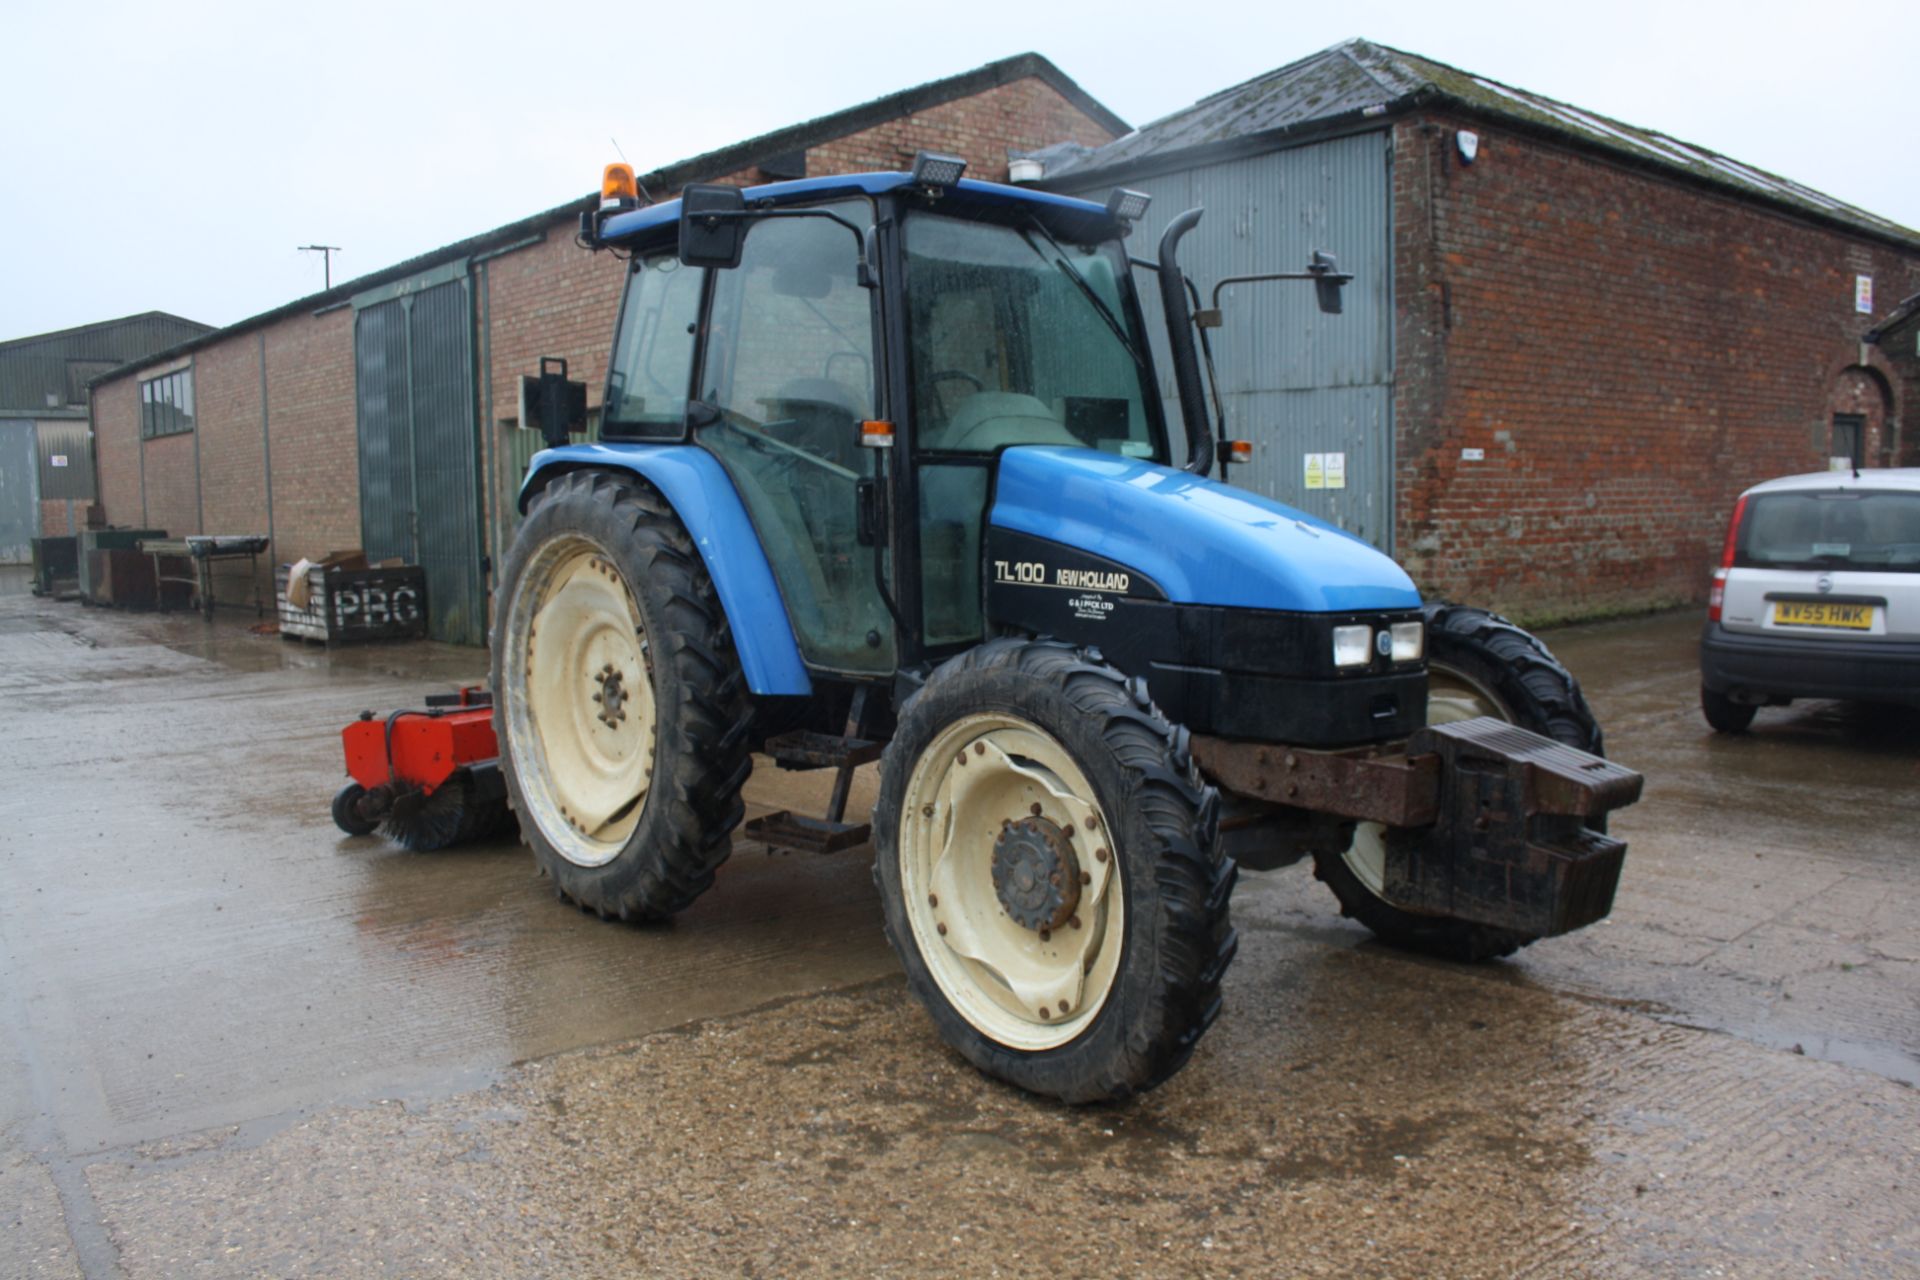 Ford New Holland TL100, 4wd Tractor, Reg Y387 0FW 6,940 hours, 3 speed PTO, Tyres - Rear: - Image 2 of 4